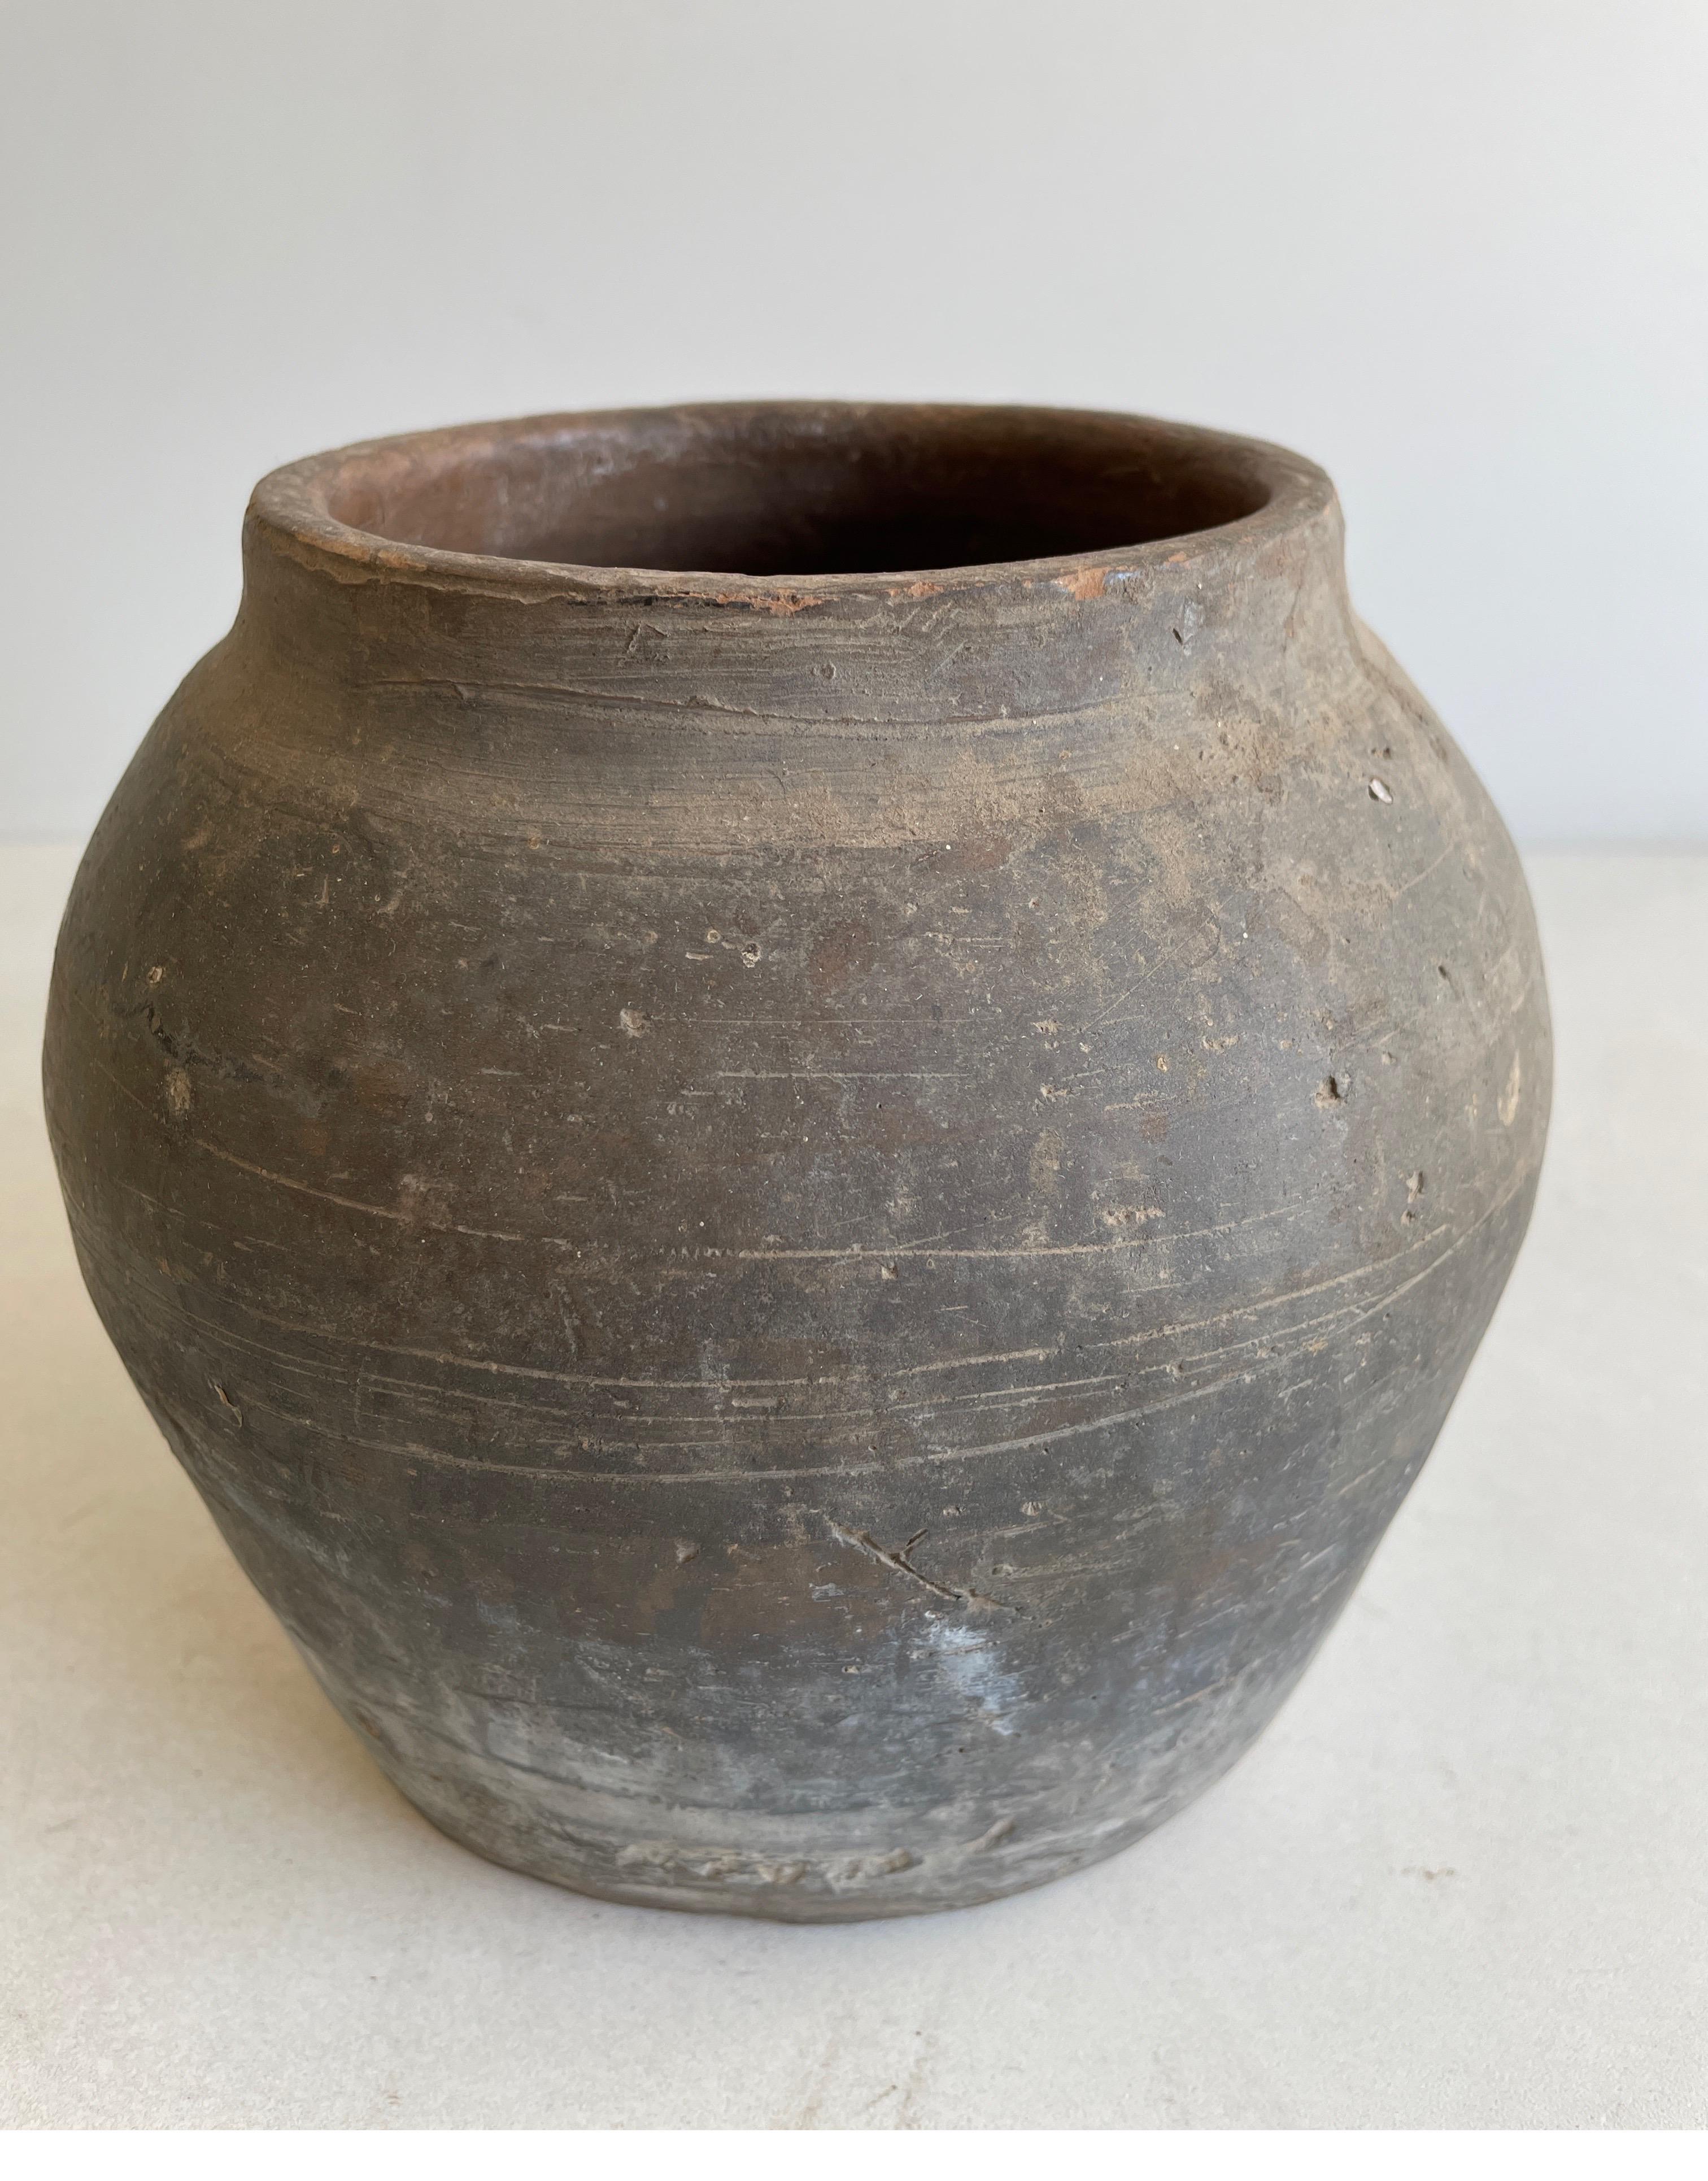 Vintage Matte Clay Oil Pottery Decorative Pot
Vintage Matte Oil Pots Pottery beautifully terracotta rich in character, this vintage oil pot adds just the right amount of texture + warmth where you need it. Stunning matte finish with warm